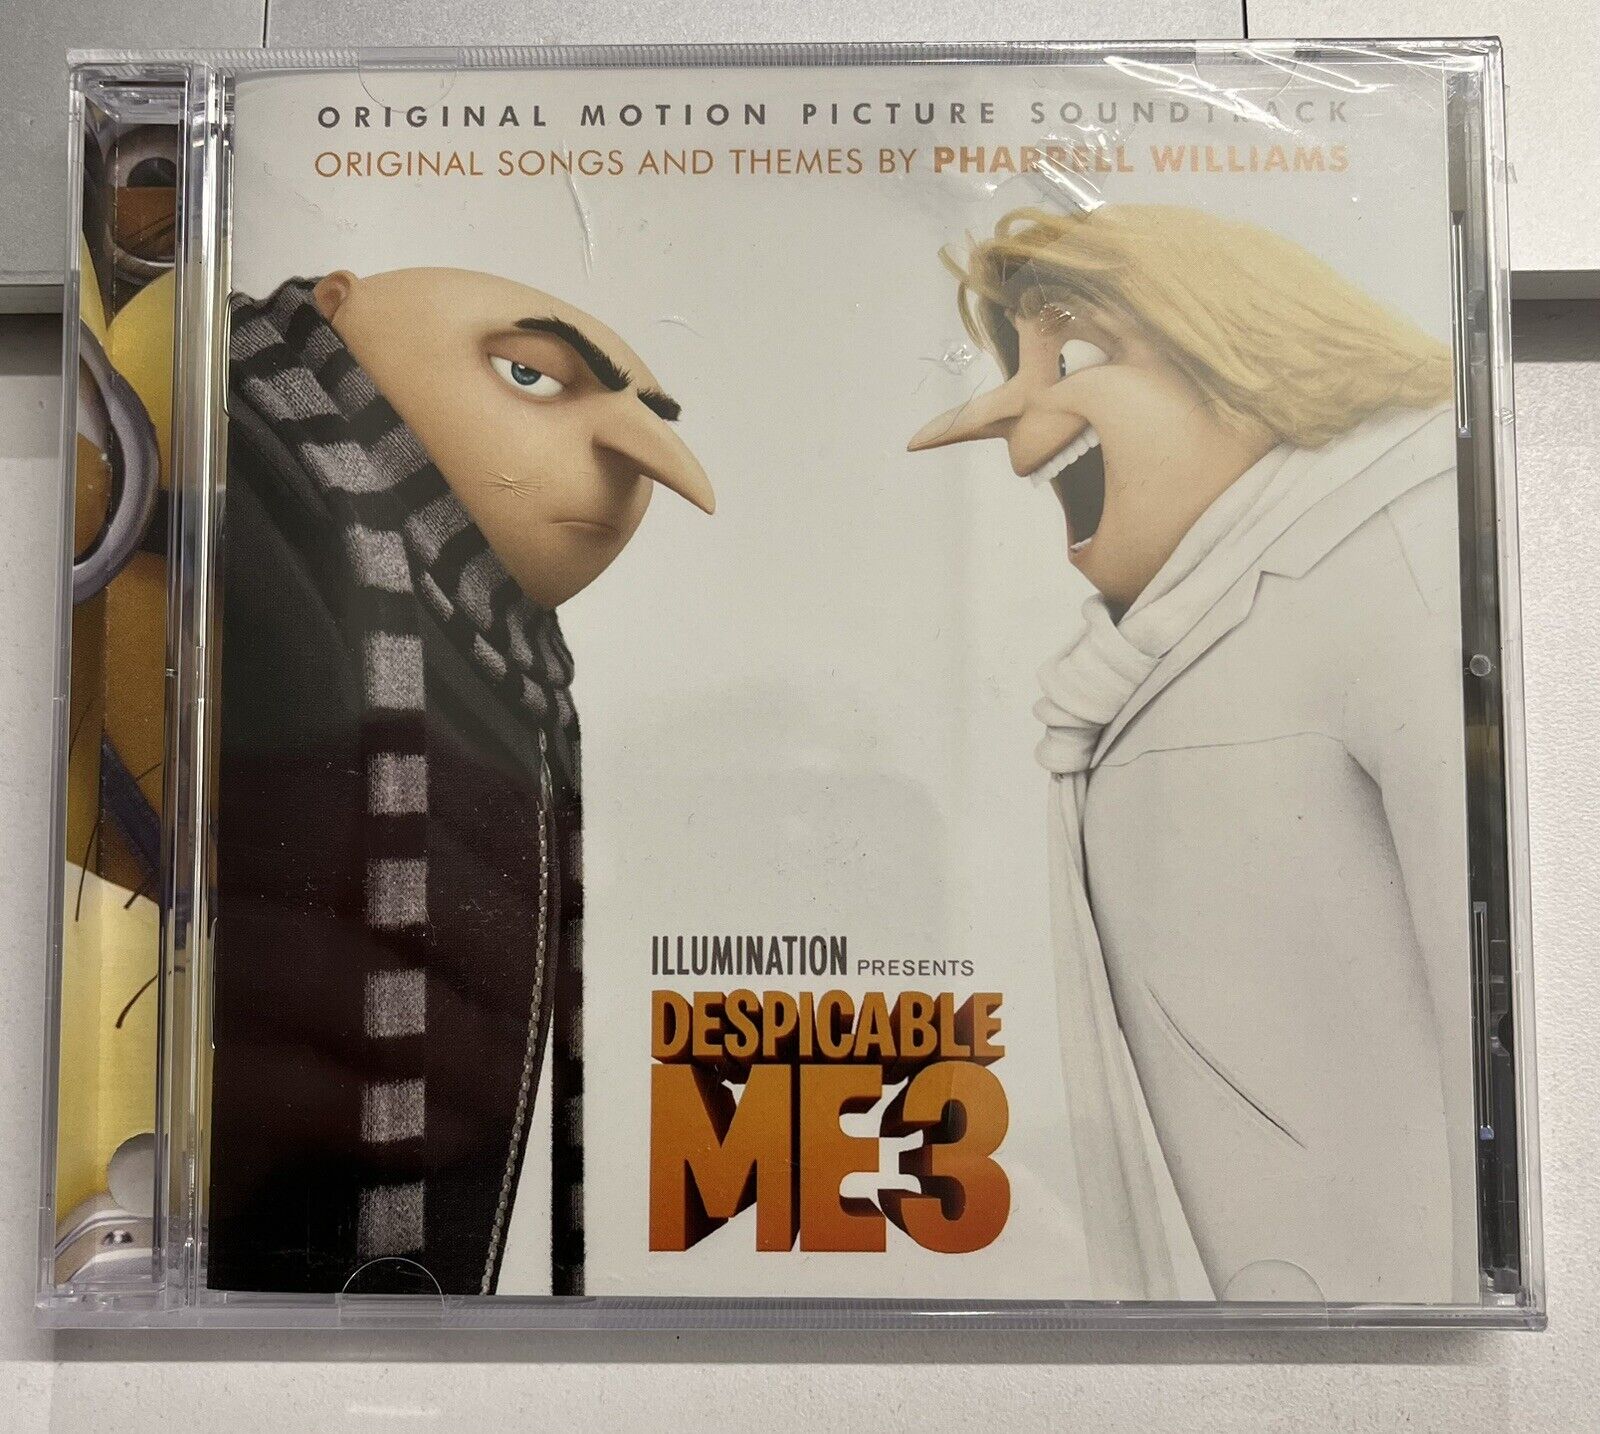 Despicable Me 3 [Motion Picture Soundtrack] New Factory Sealed CD - Pharrell